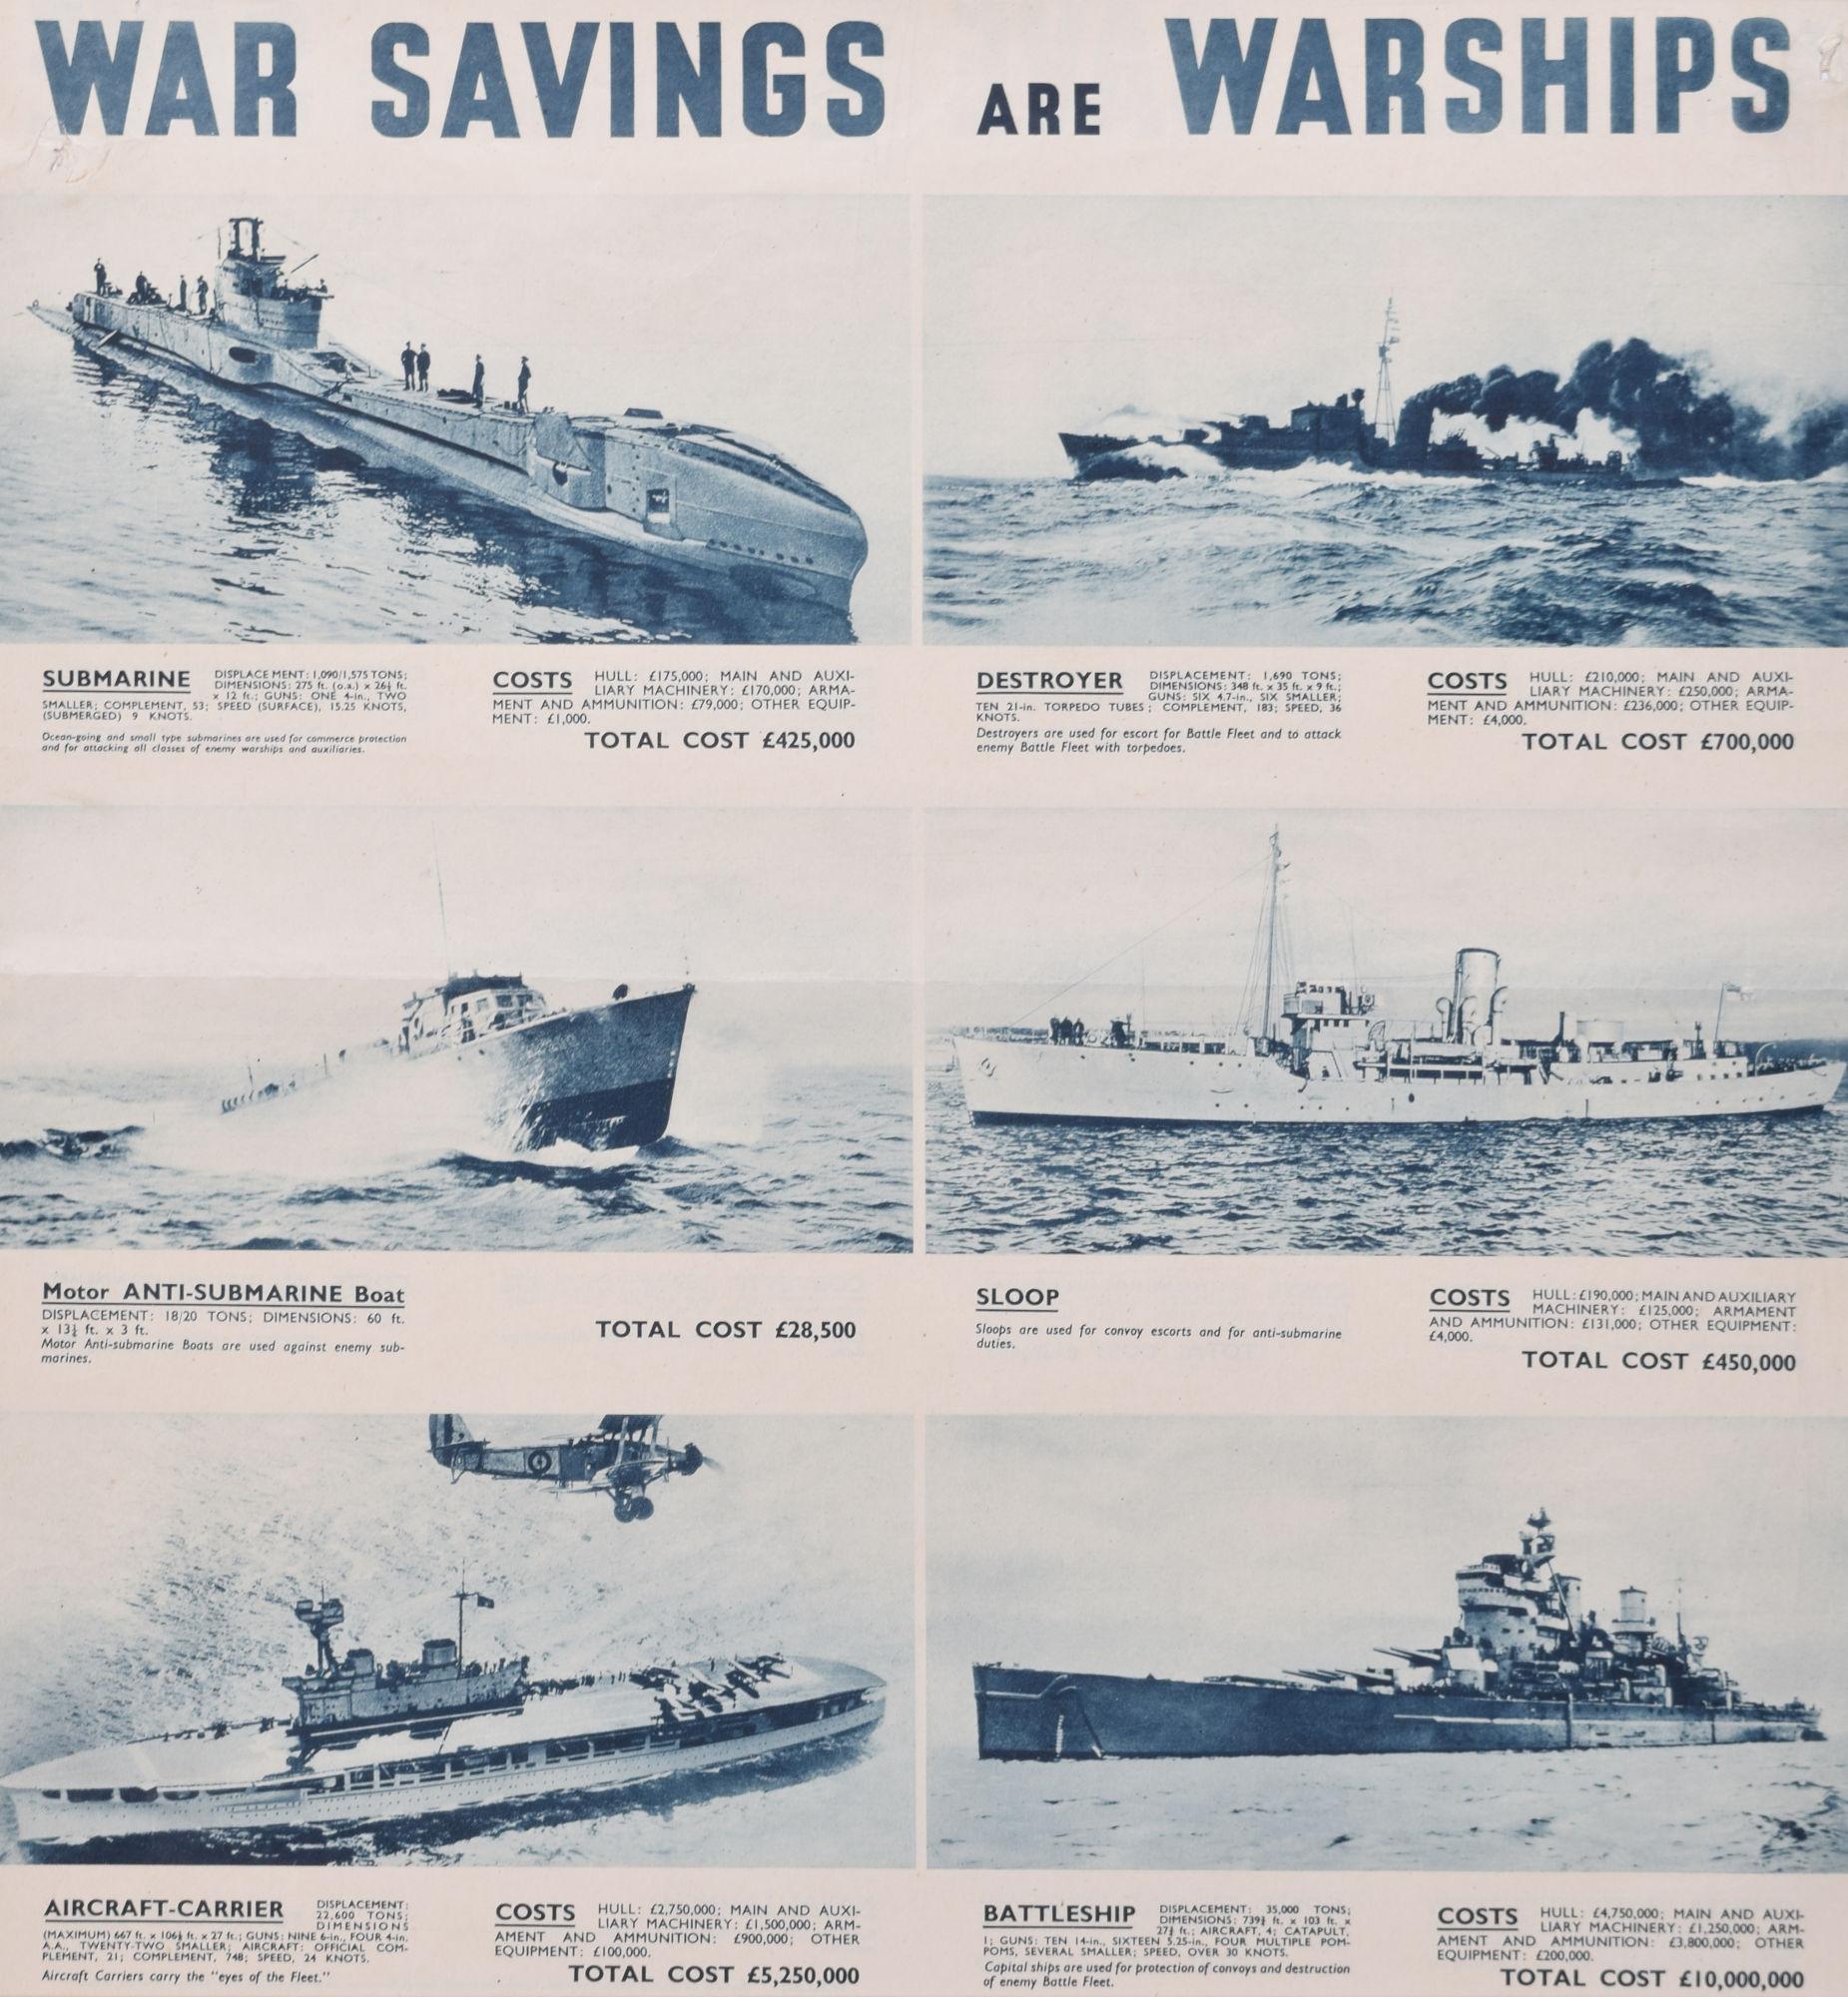 War Savings are Warships / The Signal is Save original vintage WW2 poster - Print by Unknown